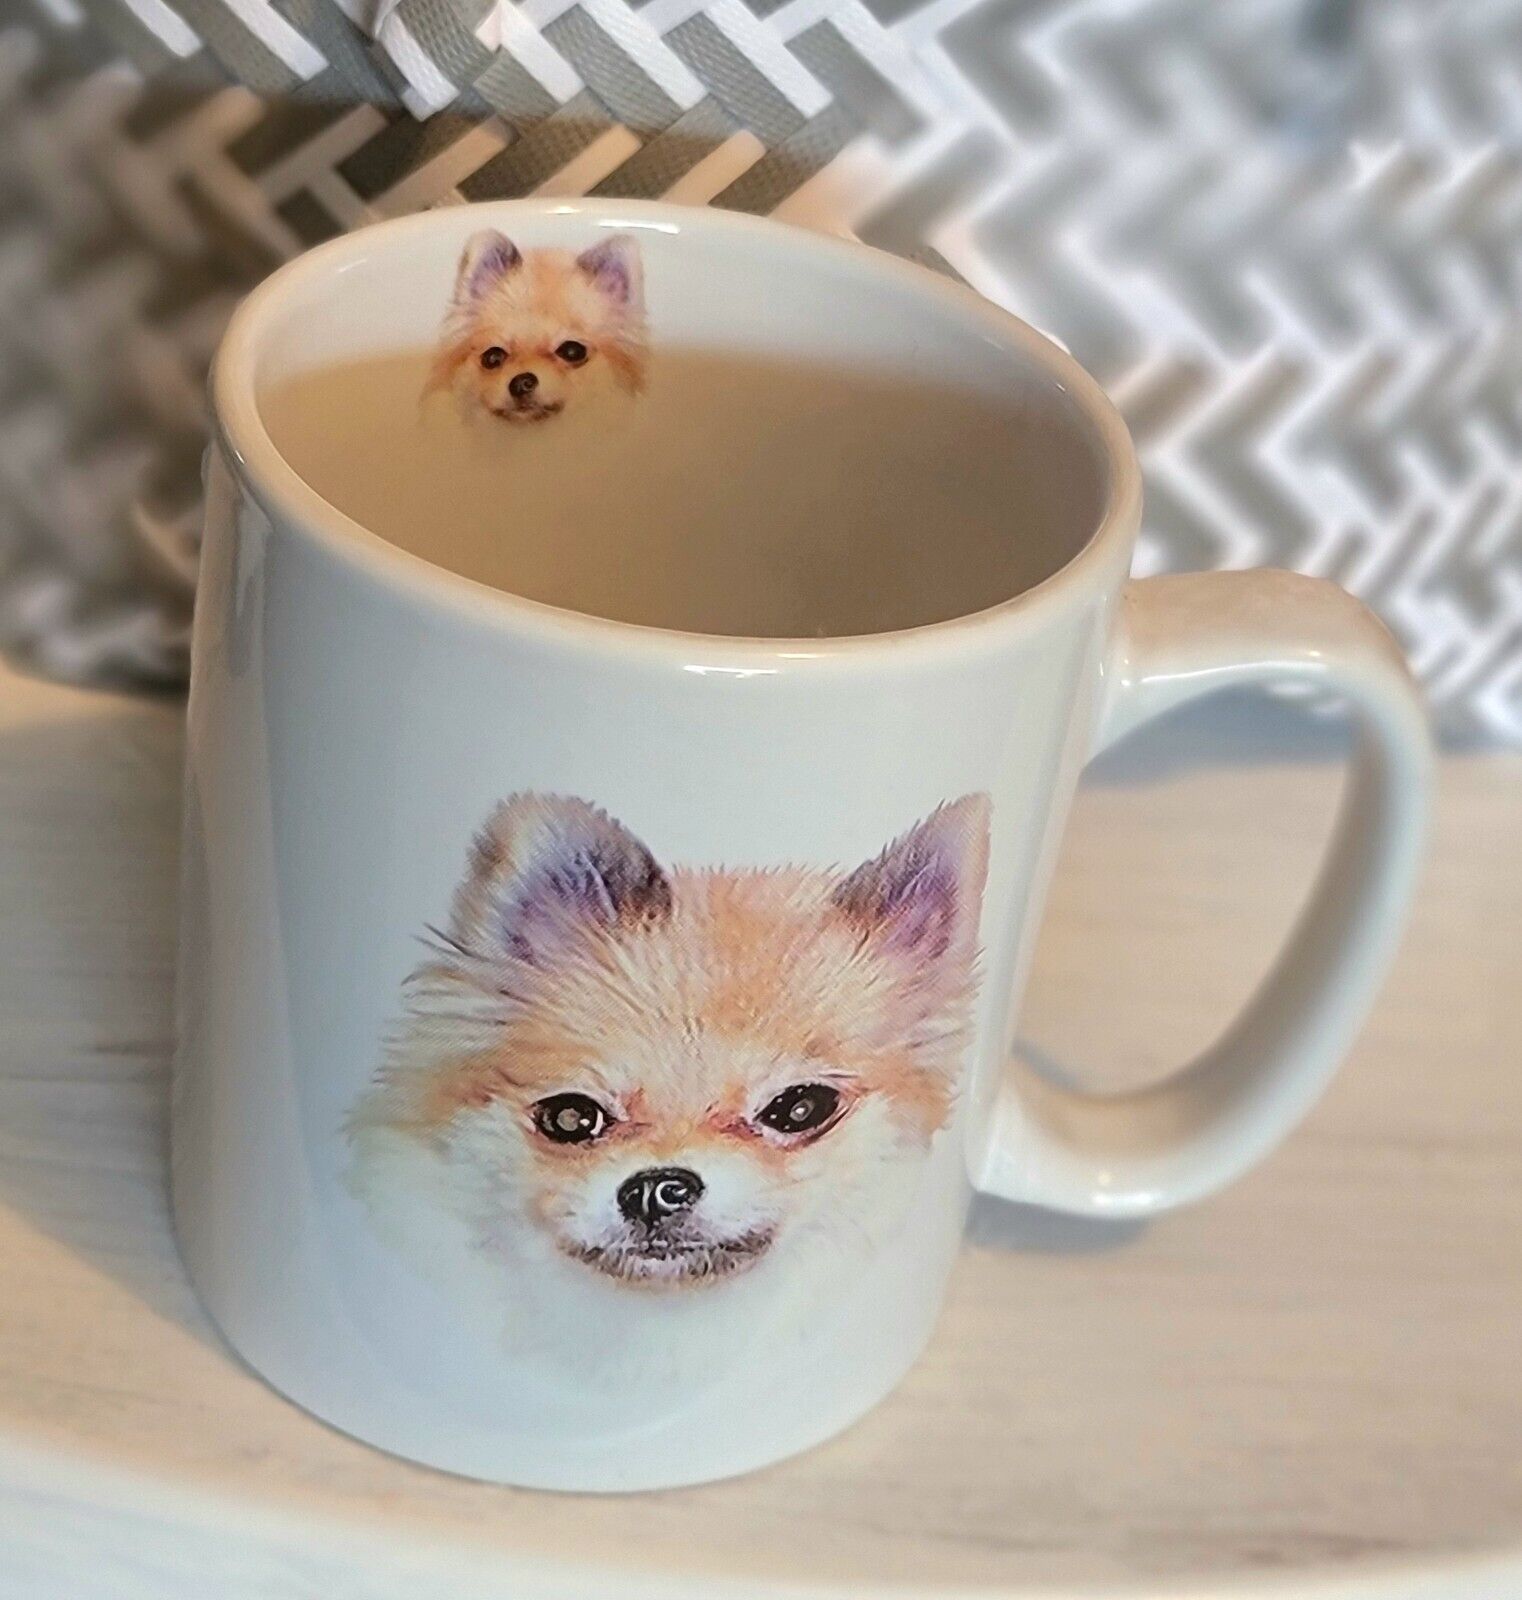 Pomeranian Puppy White Coffee Mug Picture Inside & Out Puppy Information On Back